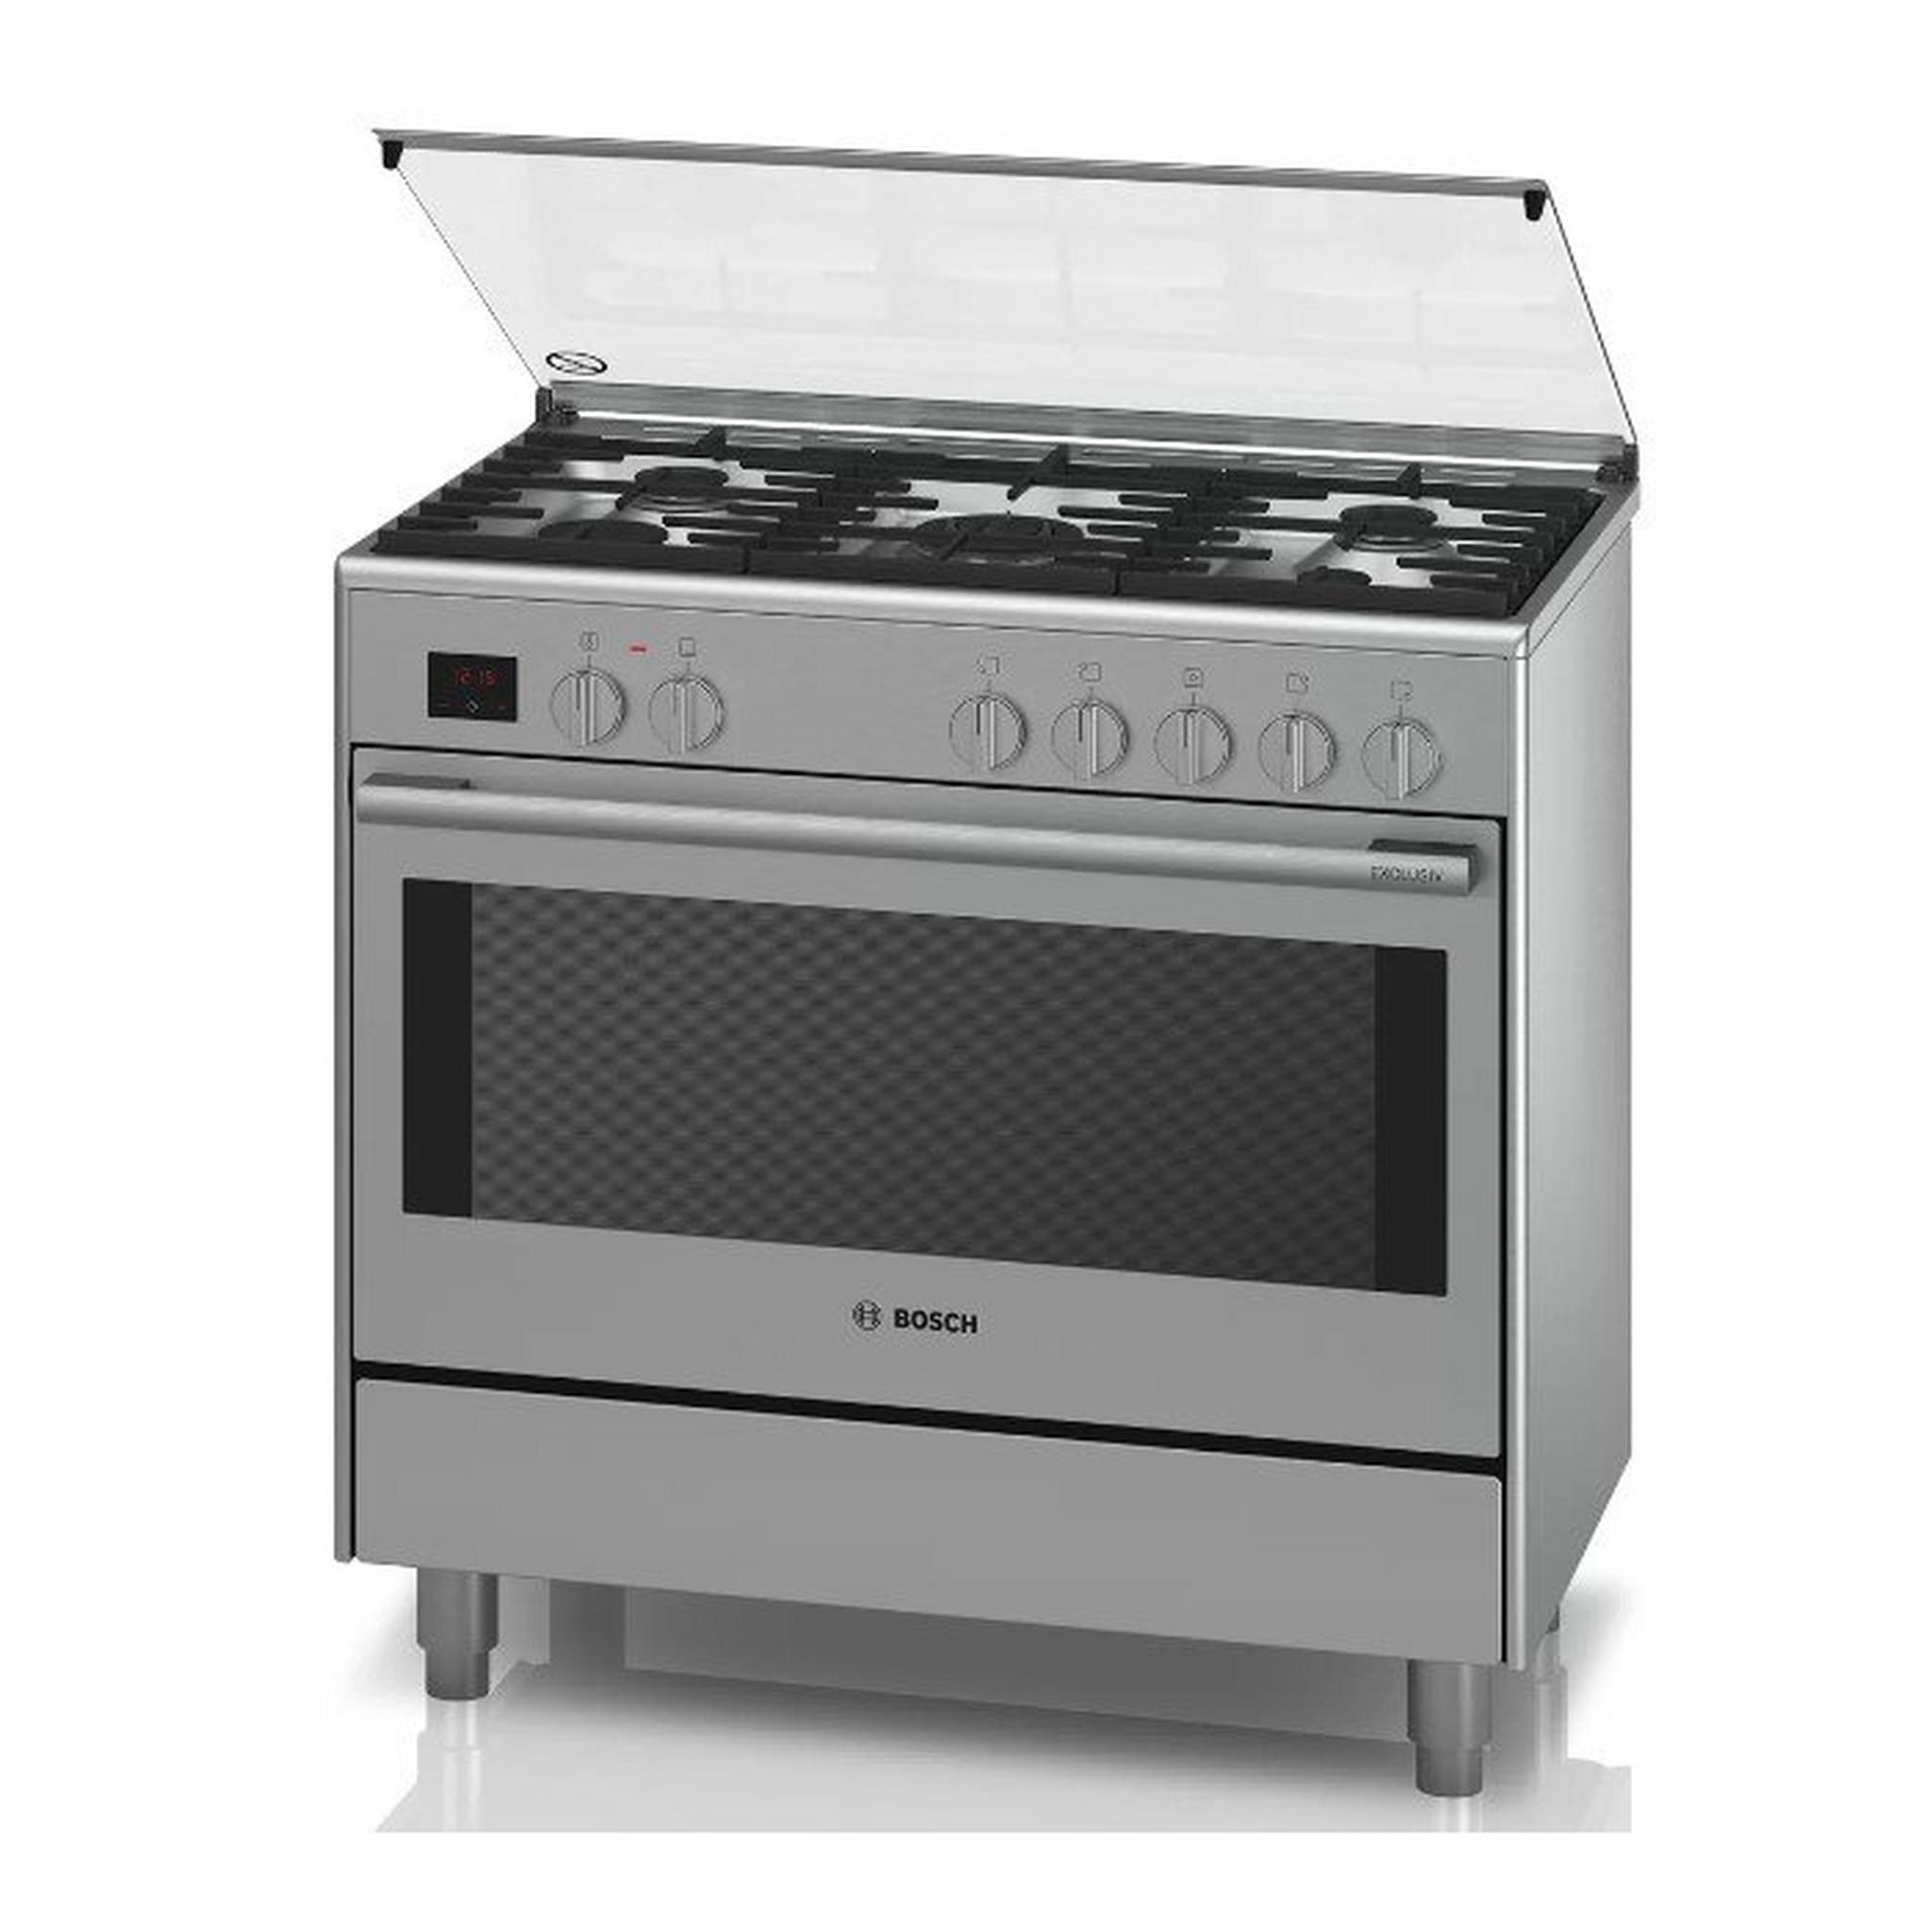 Bosch Series 8 Dual fuel 5 Burners Cooker, 90X60cm, HSB738357M - Stainless Steel